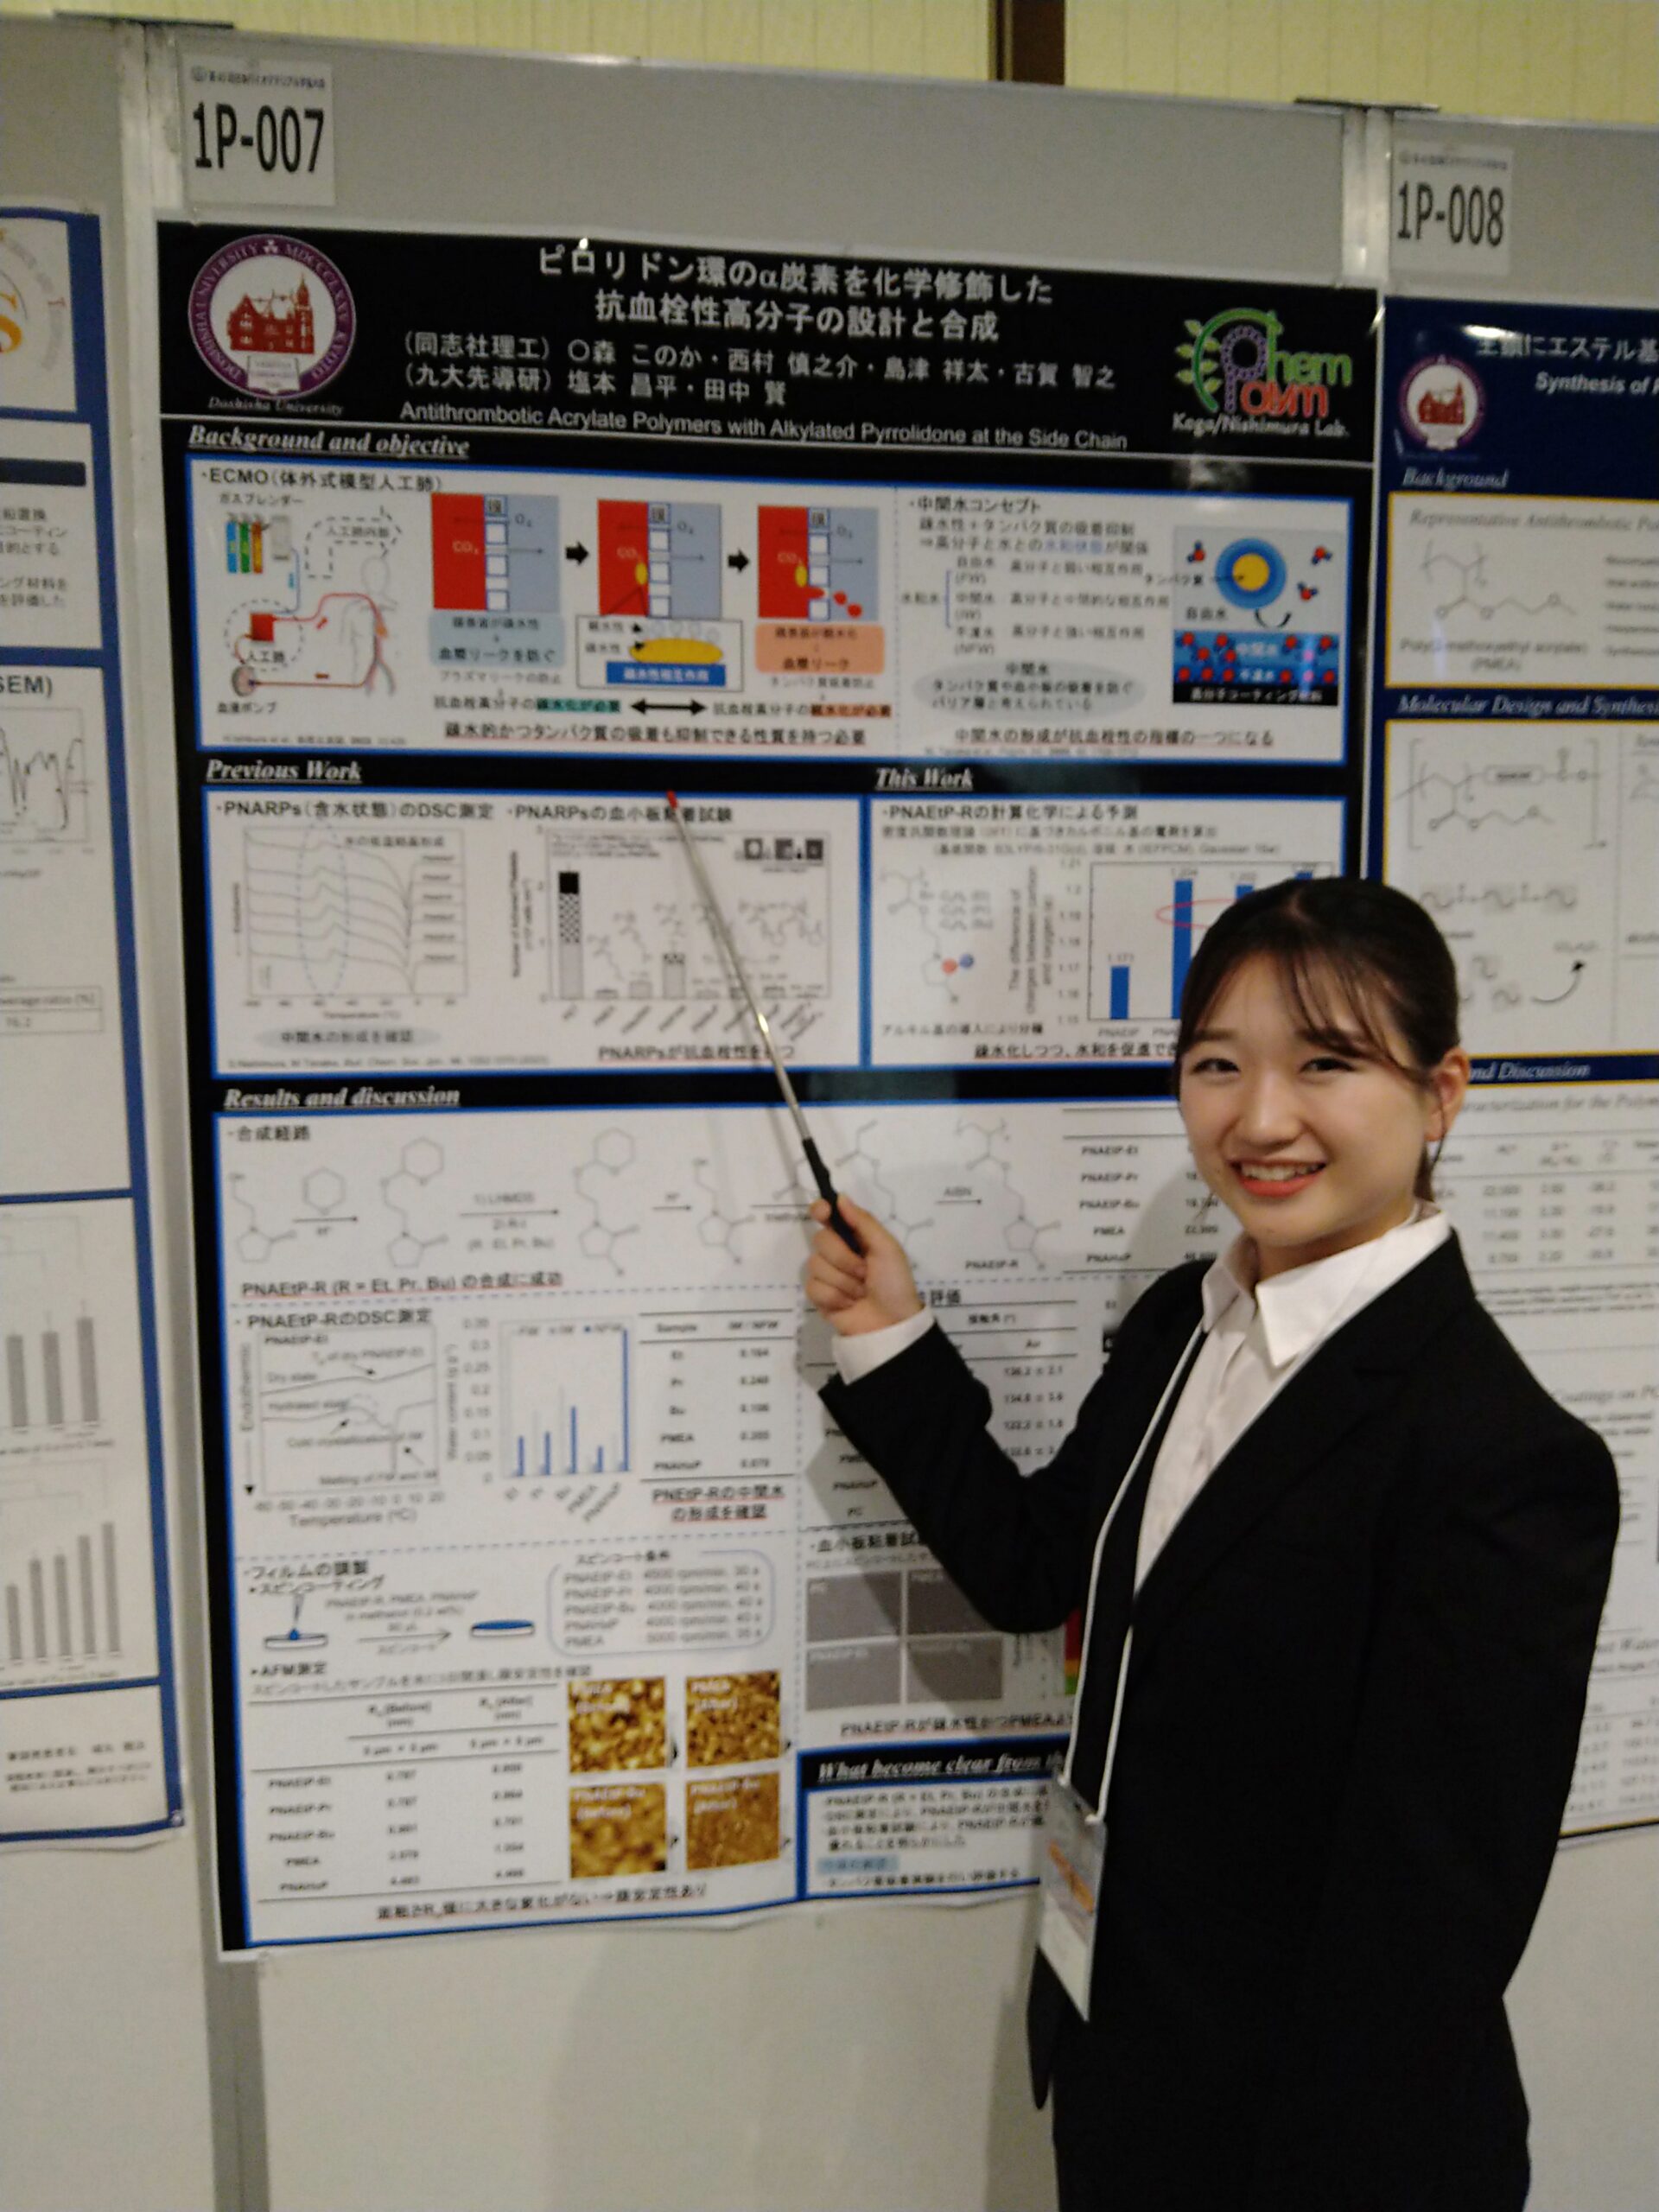 The 45th Annual Meeting of Japanese Society for Biomaterials_2